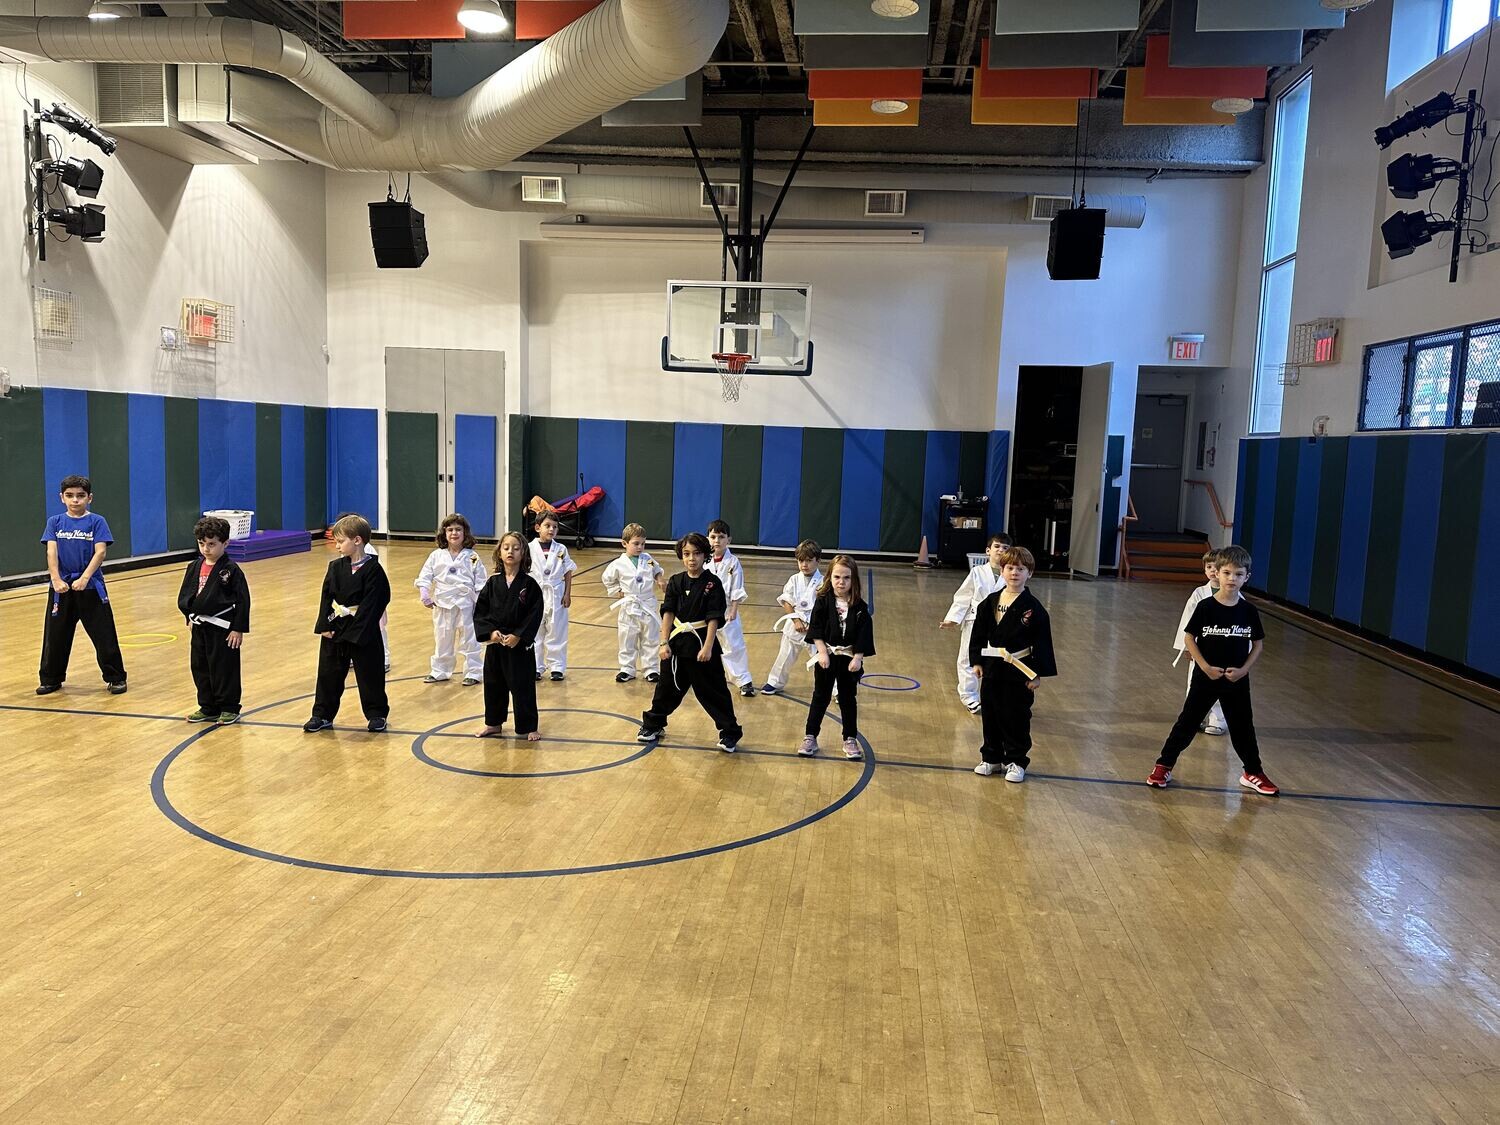 Tuesdays: 1-4 Martial Arts with Johnny Karate